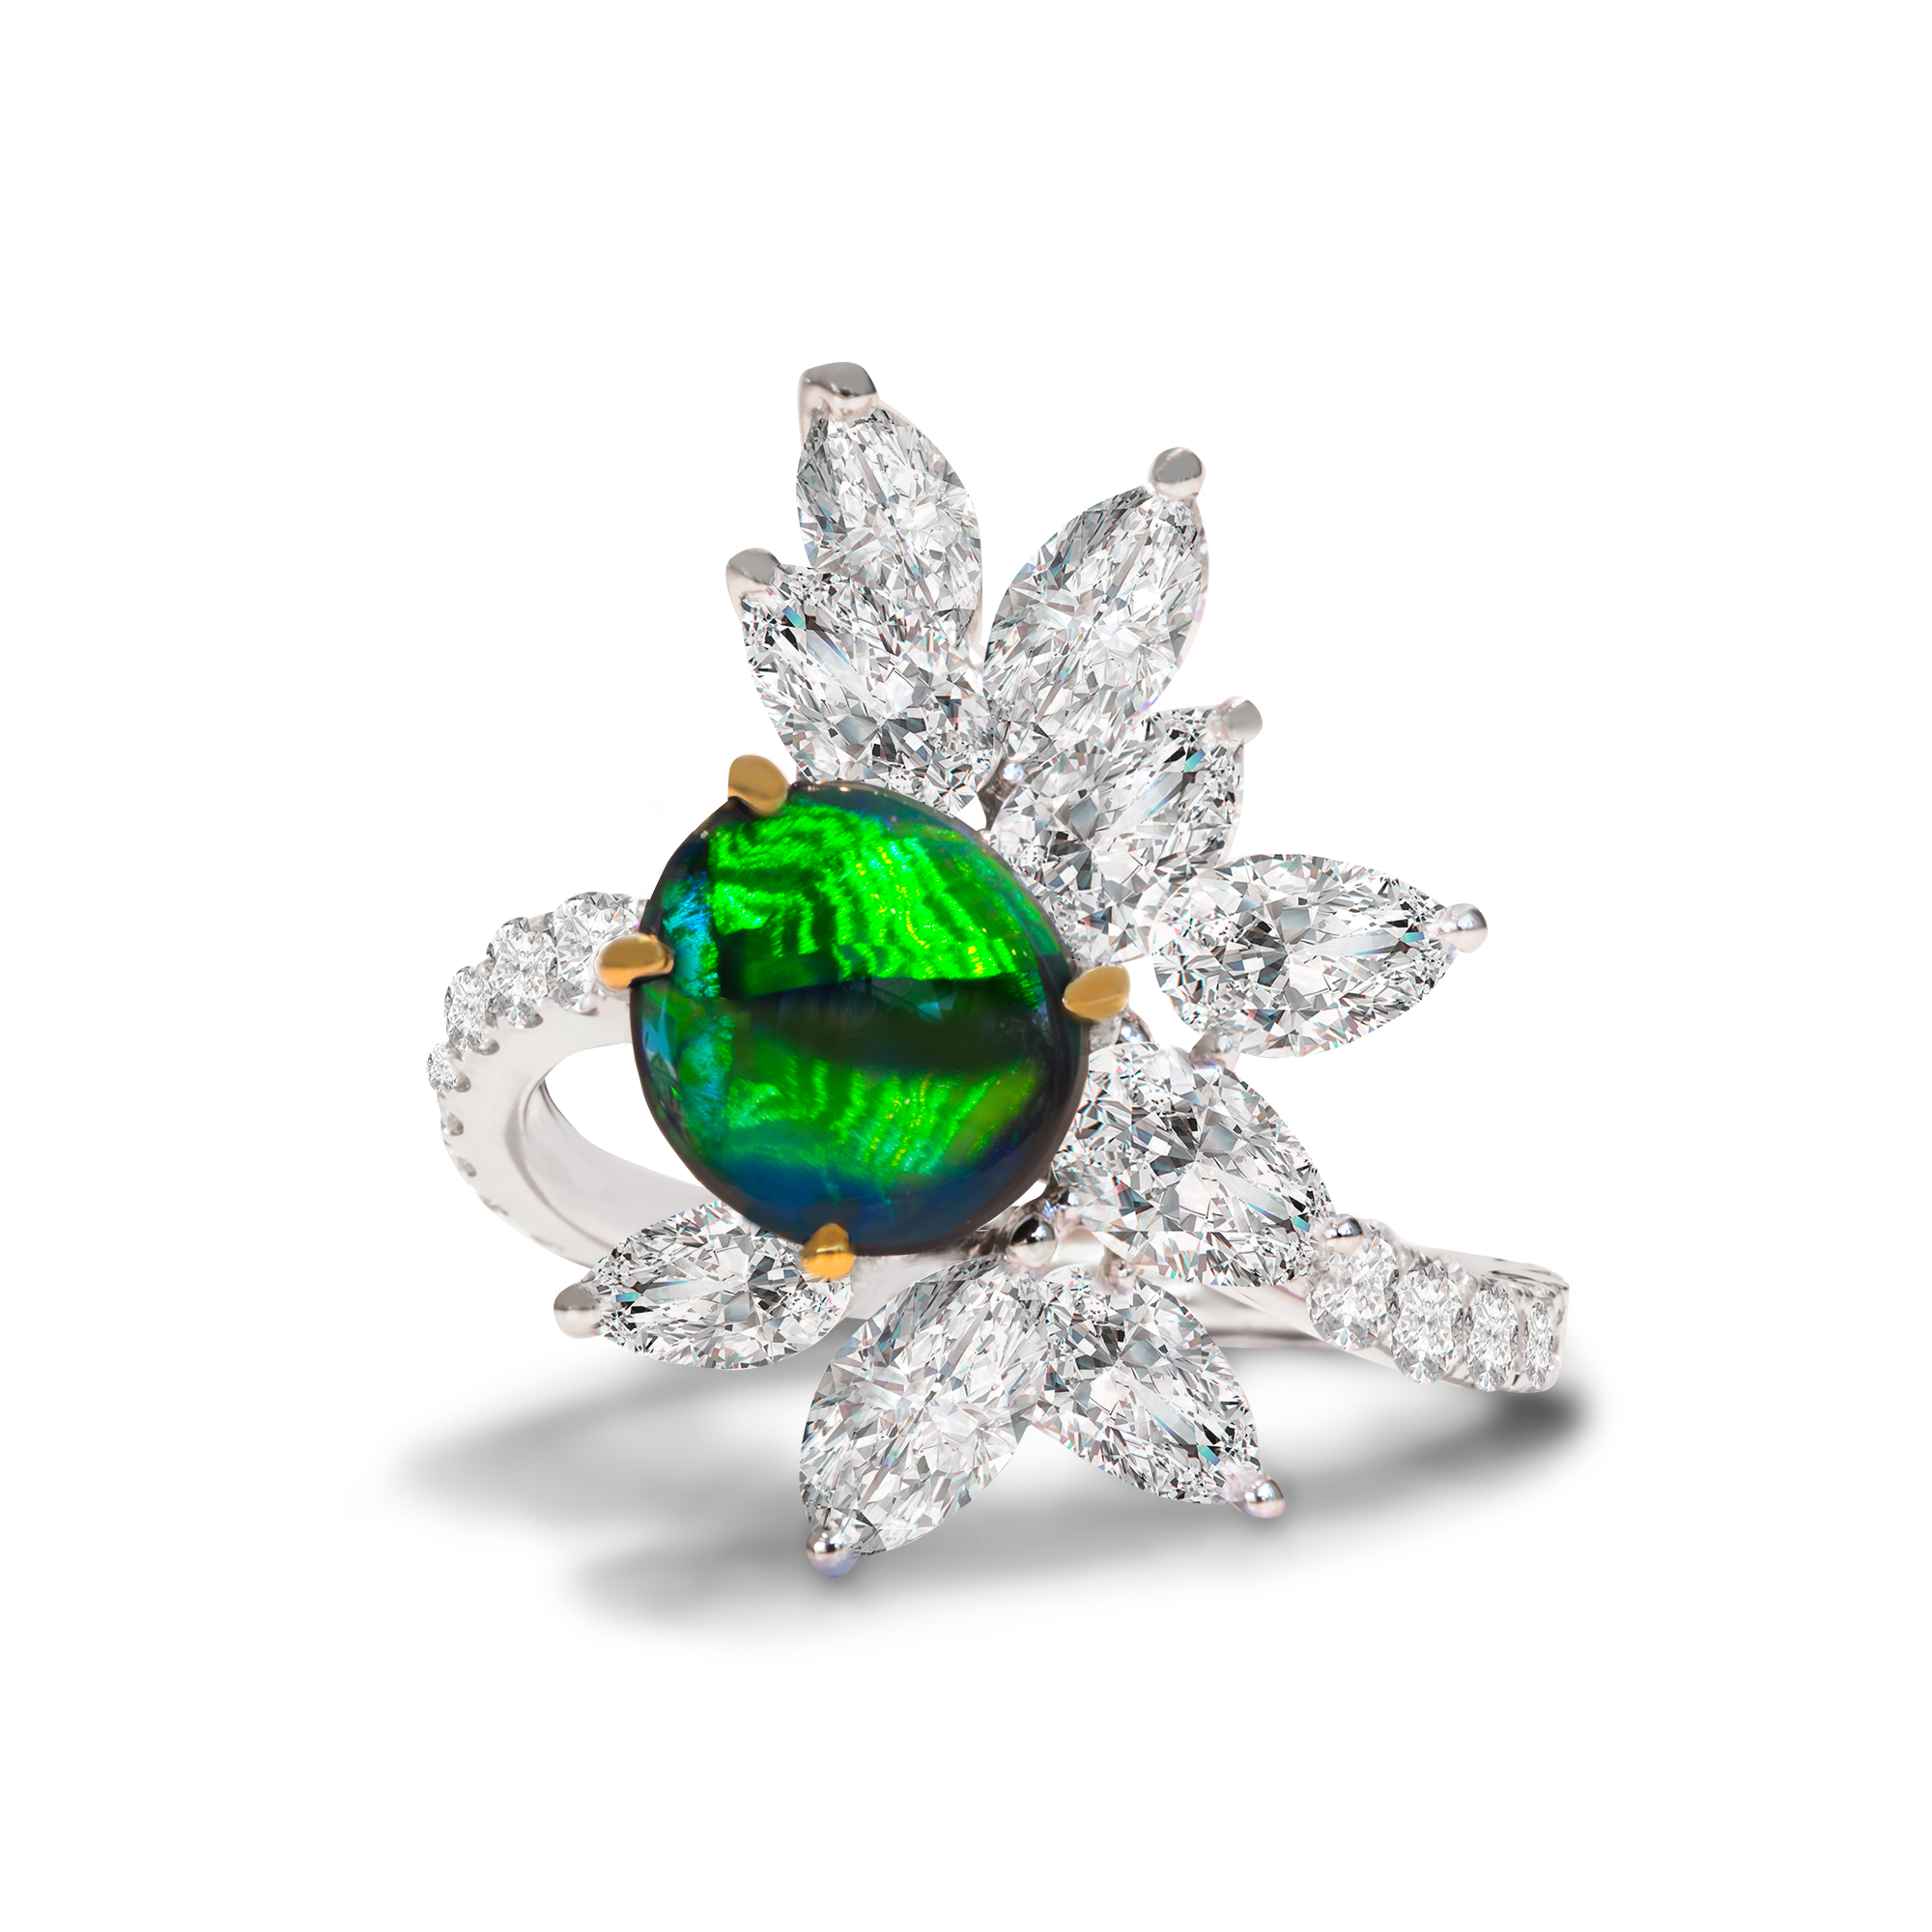 Black Opal Ring set in 18k with Diamonds featuring Broad Flashes of Greens